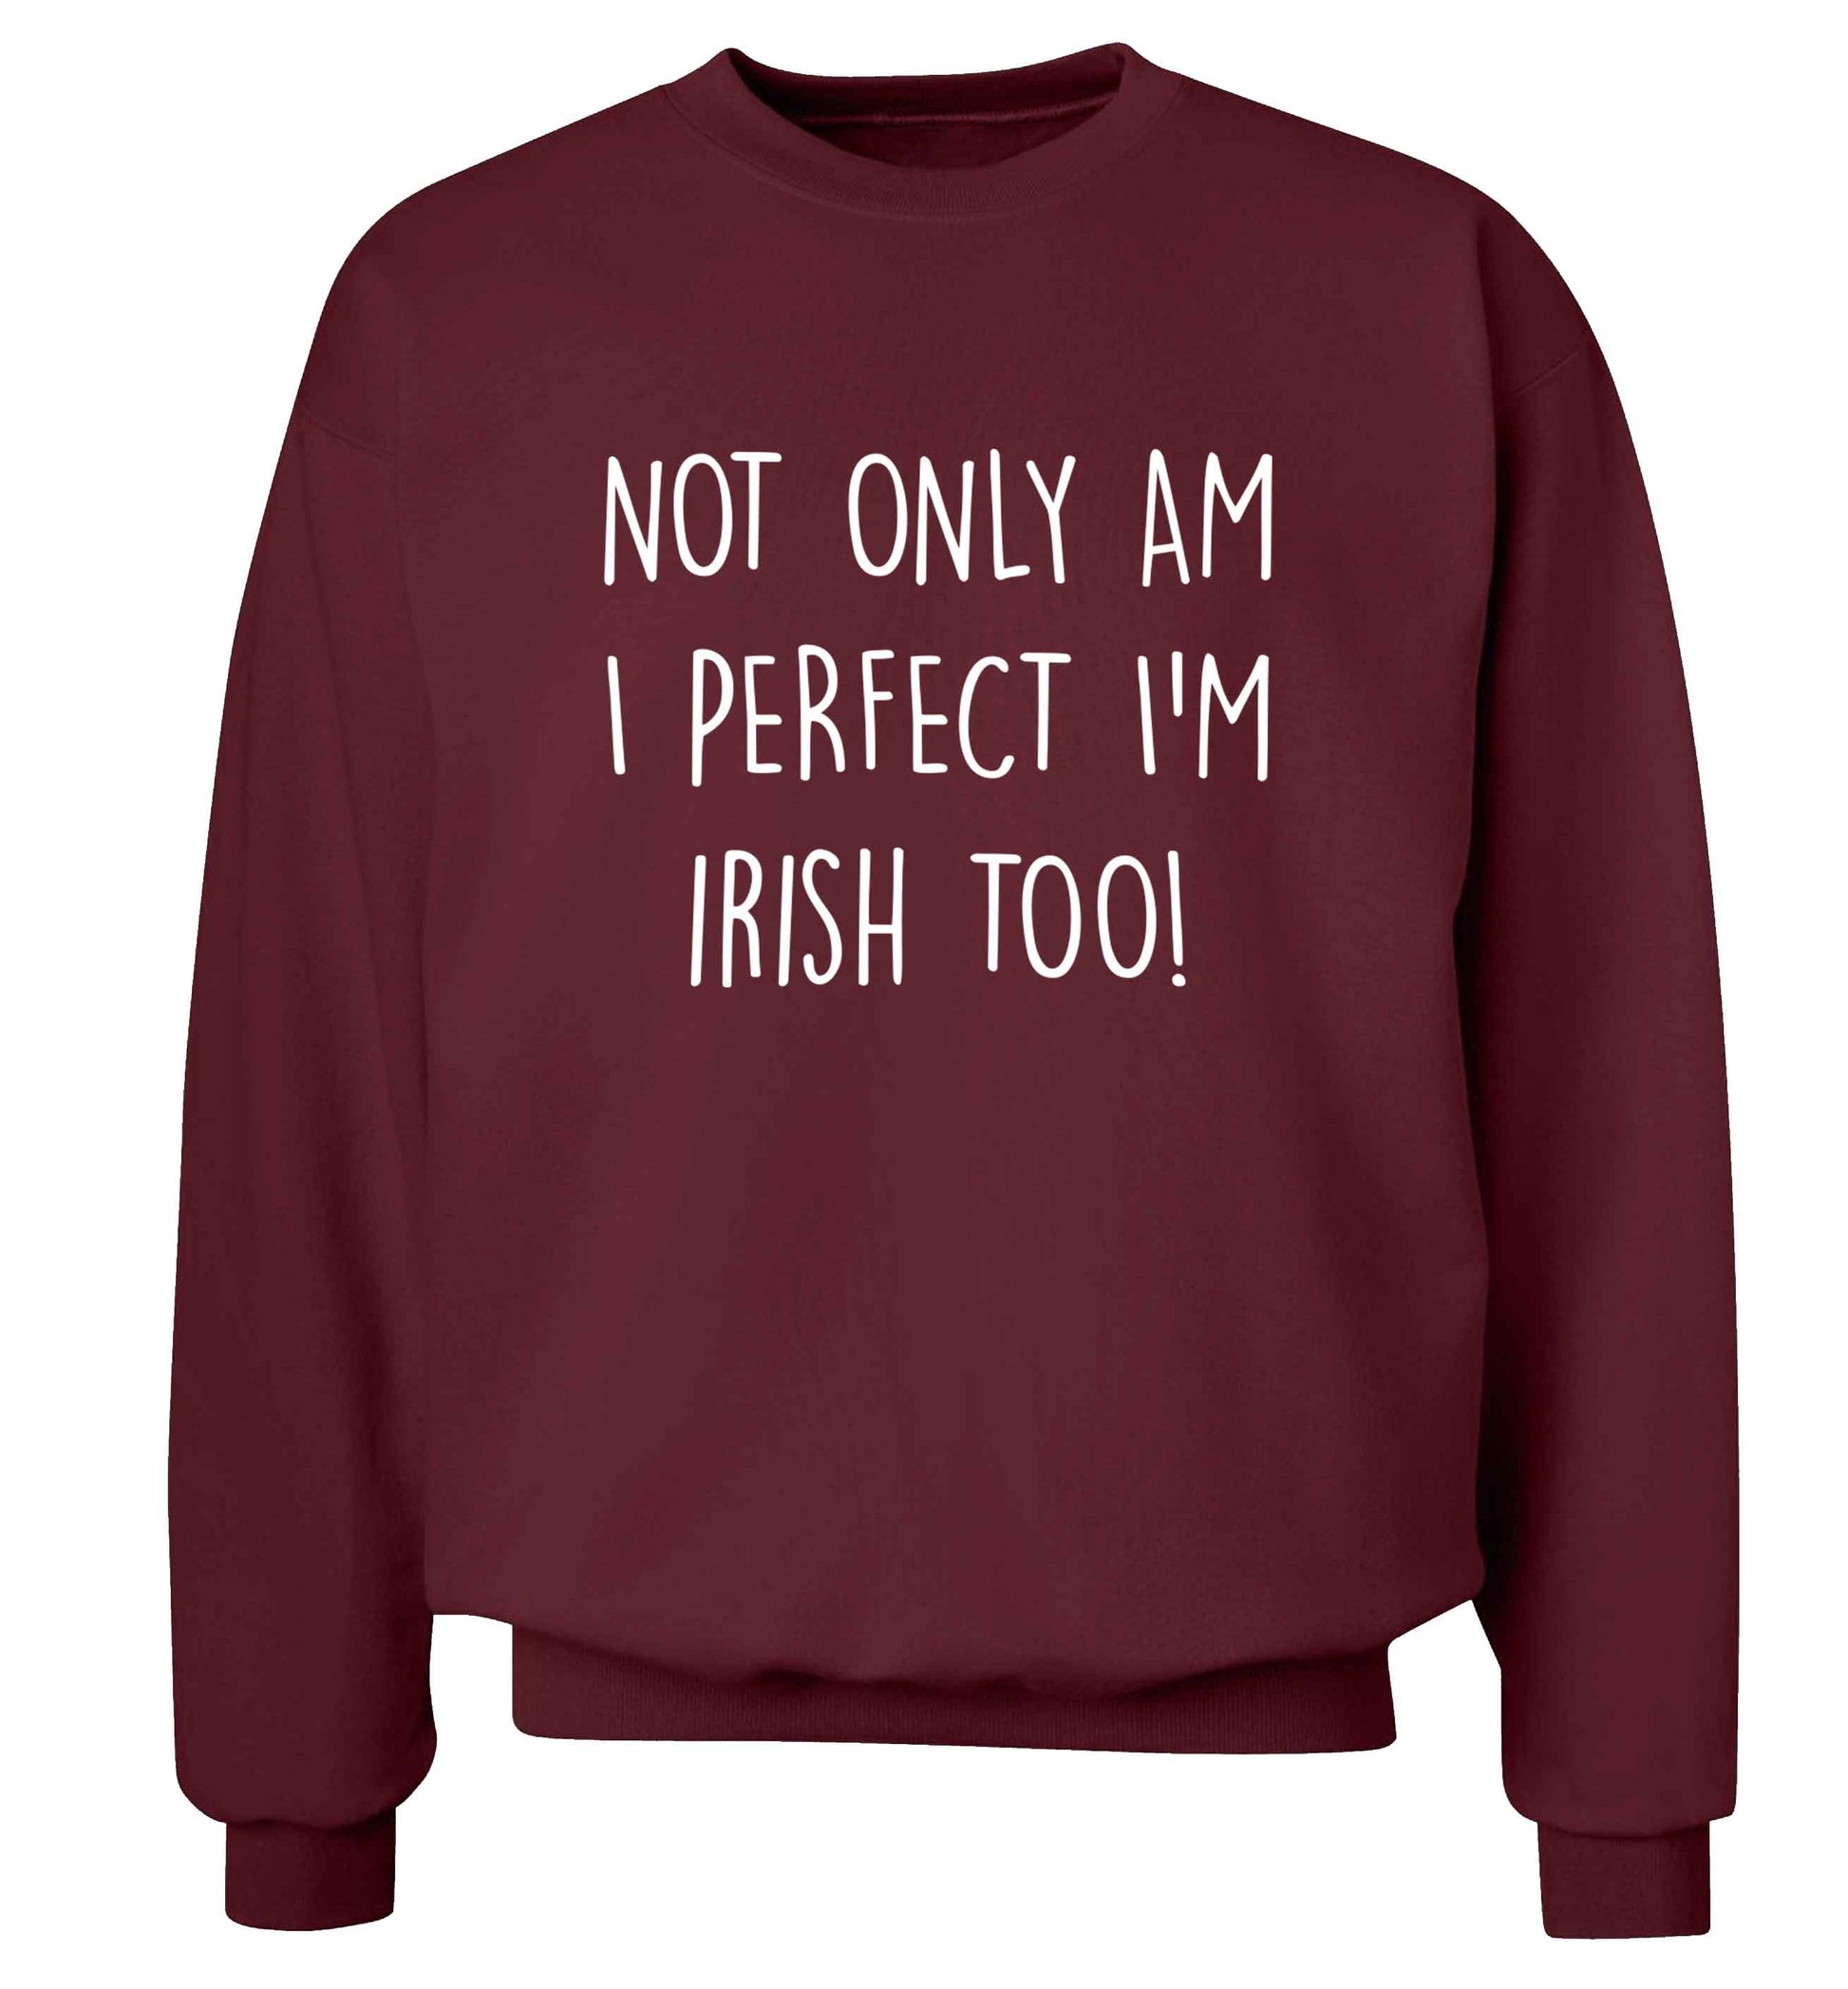 Not only am I perfect I'm Irish too! adult's unisex maroon sweater 2XL